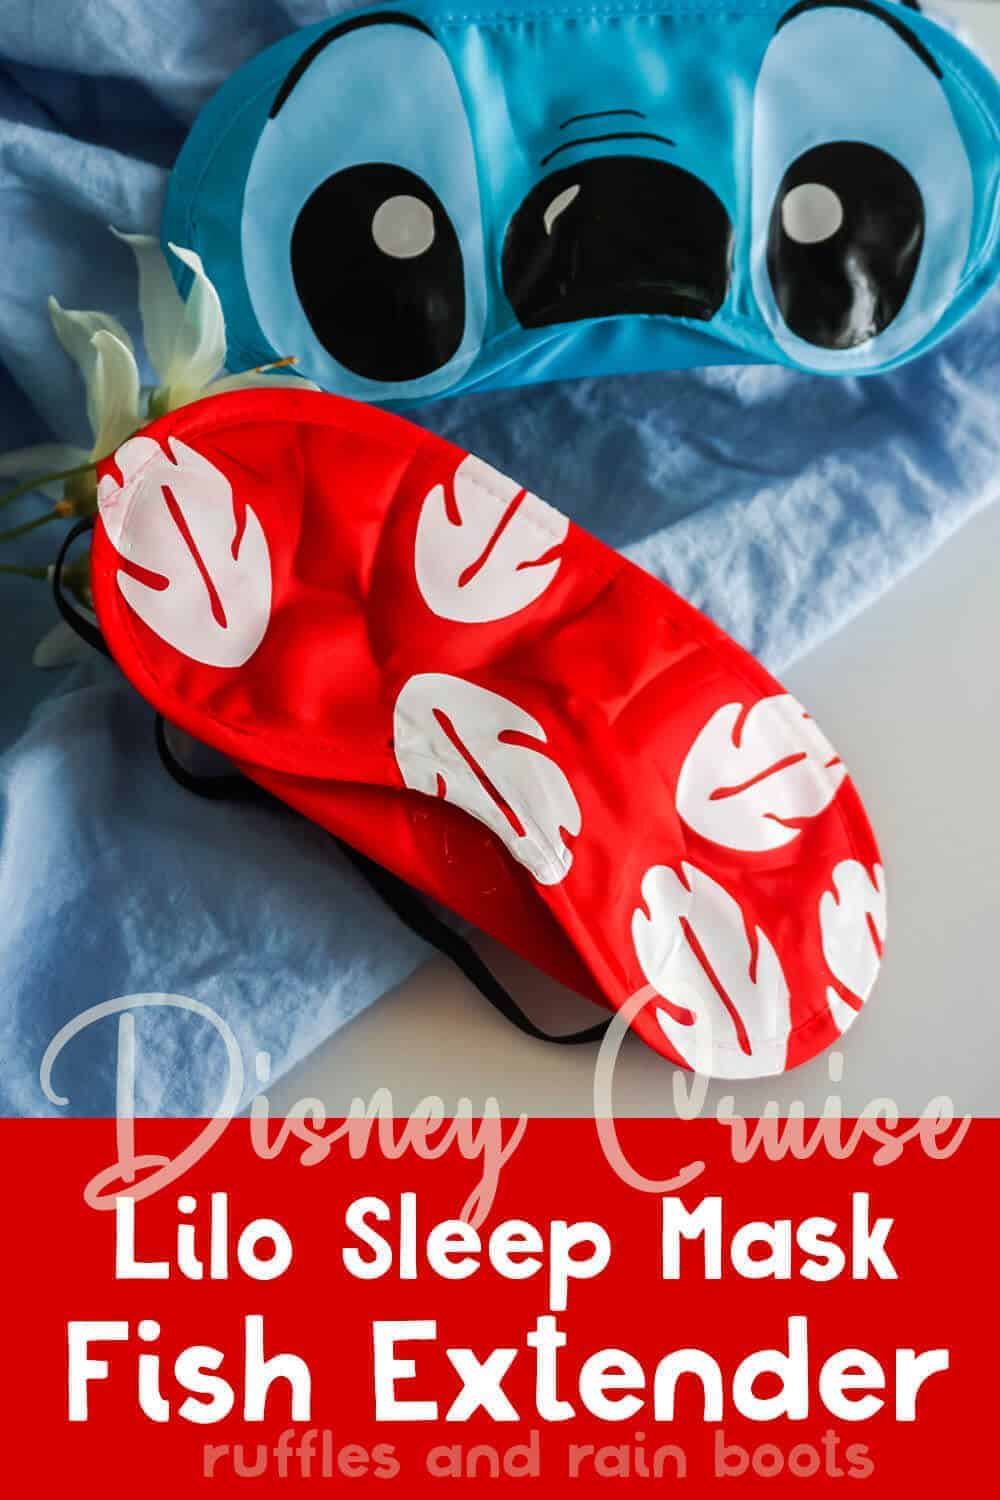 easy disney craft of a lilo eye mask with text which reads disney cruise lilo sleep mask fish extender